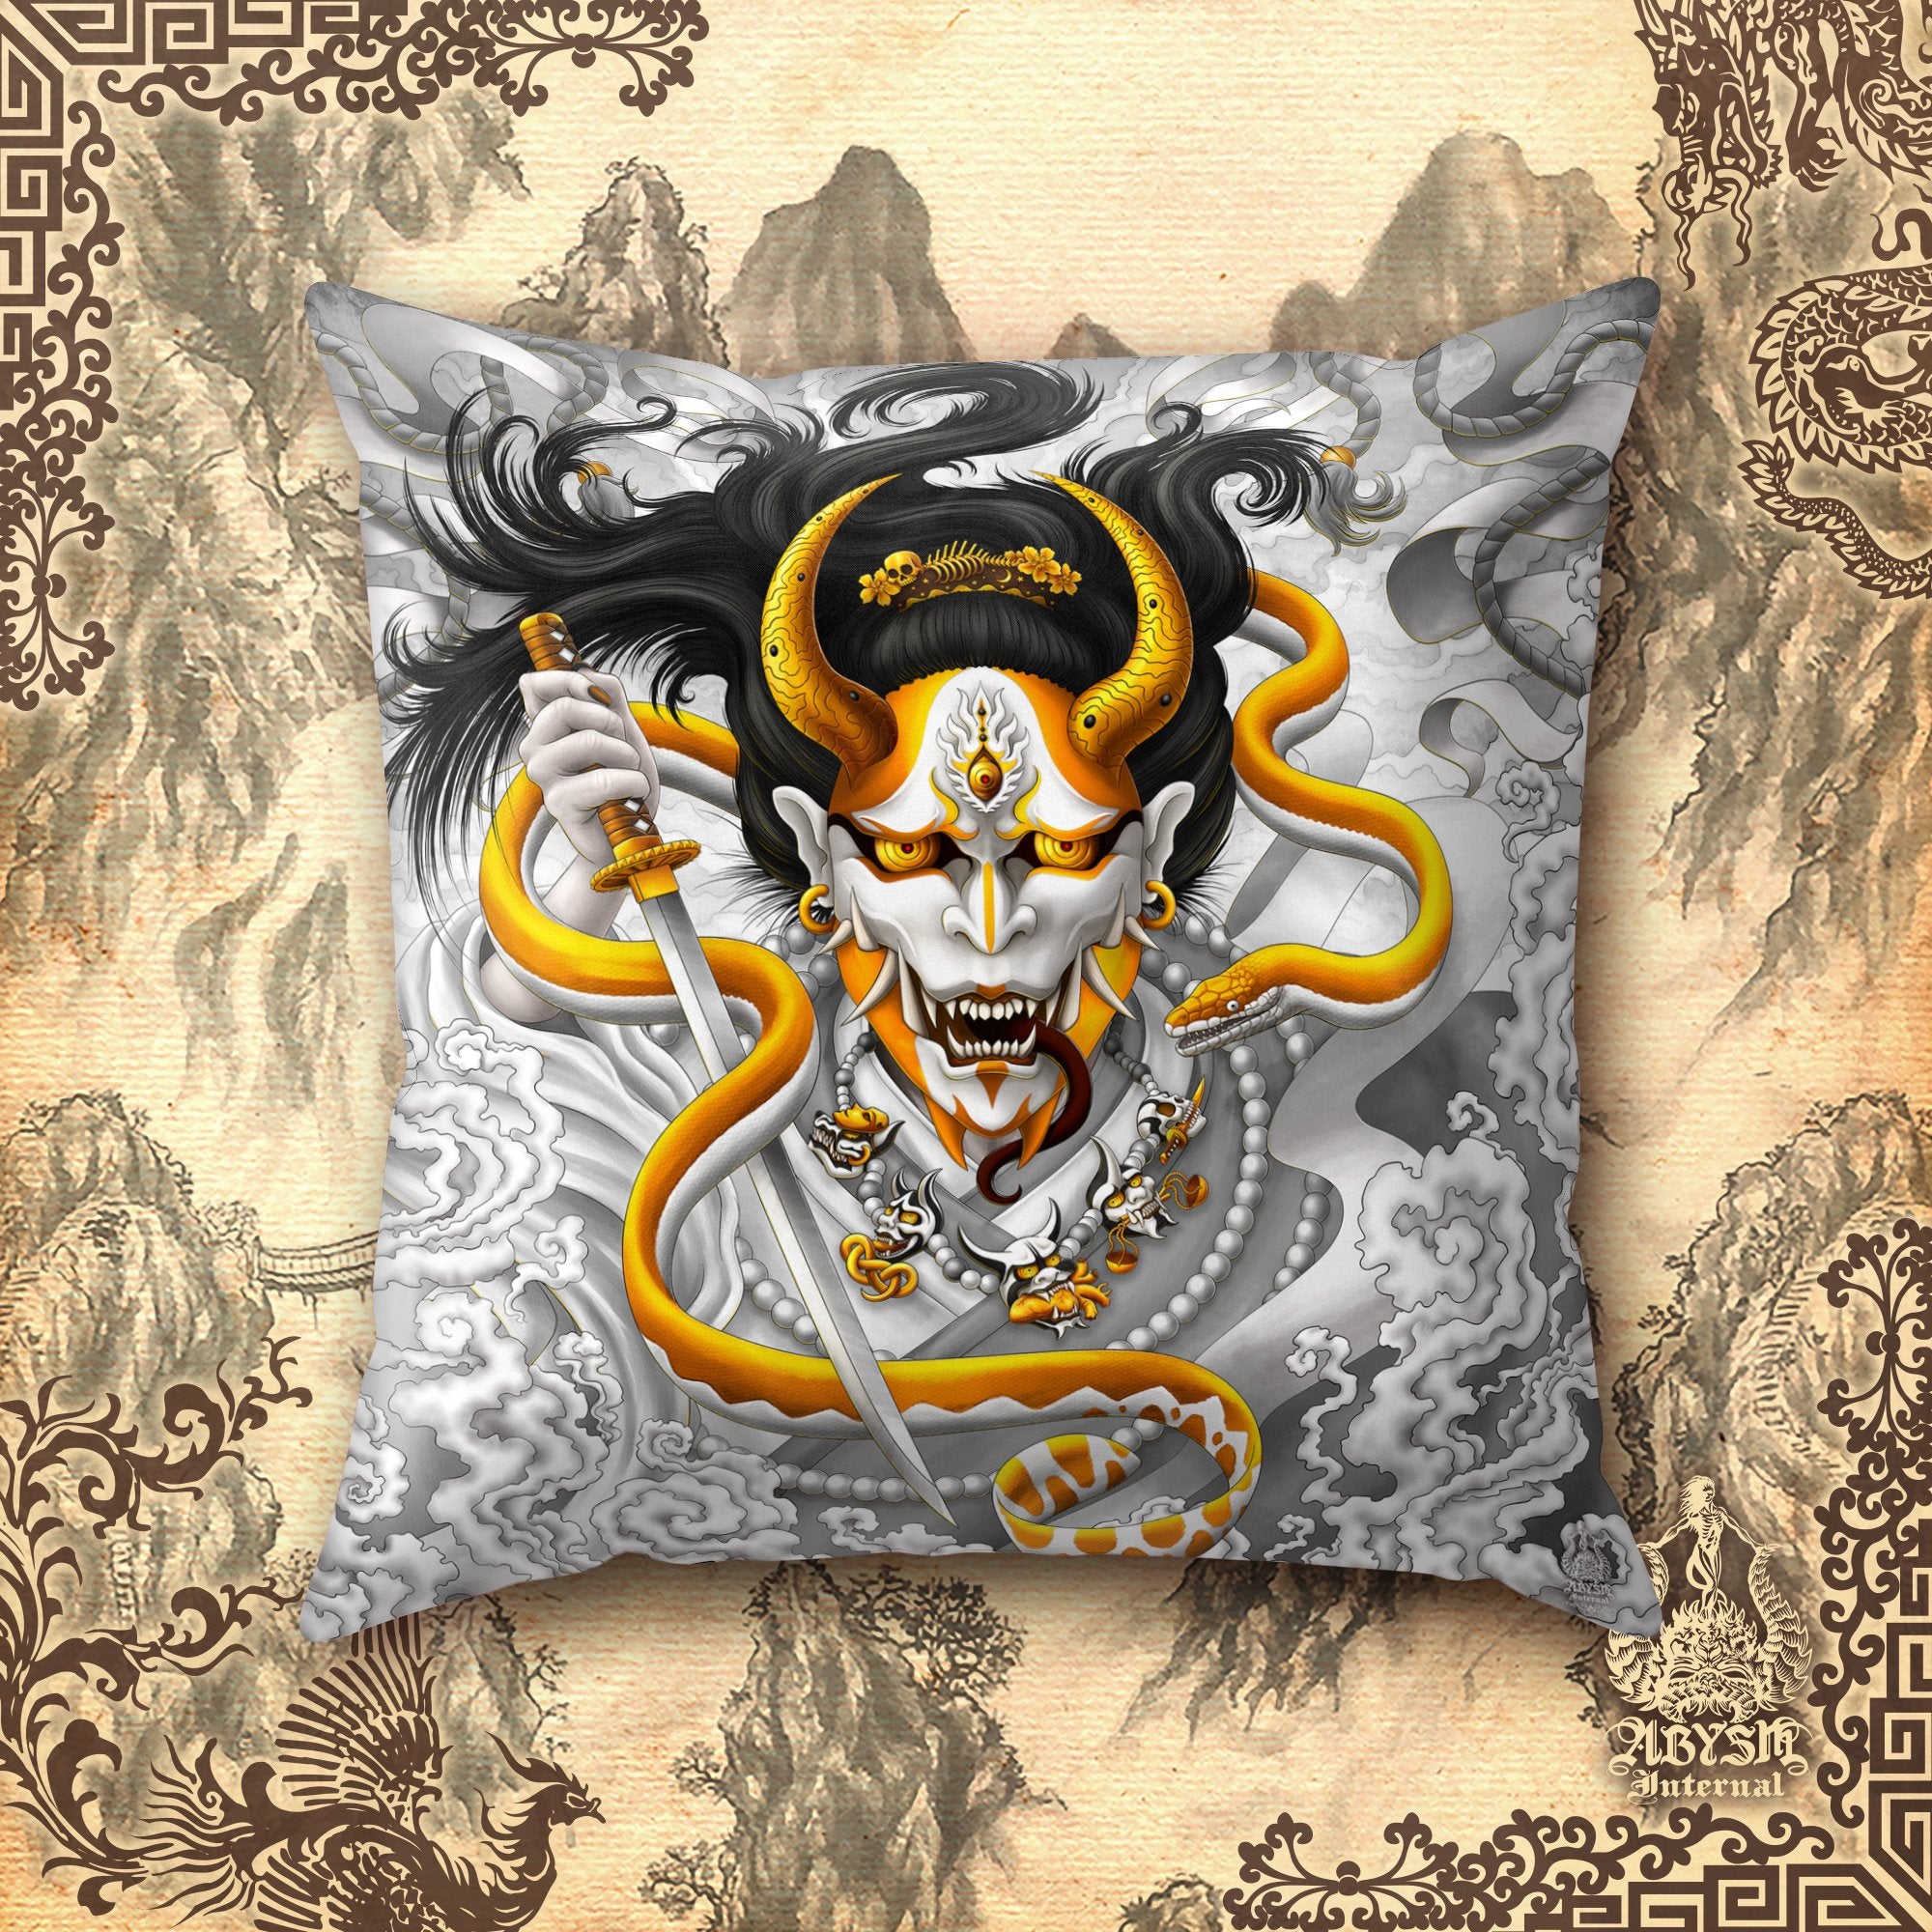 Hannya Throw Pillow, Decorative Accent Pillow, Square Cushion Cover, Japanese Demon & Snake, Anime Room Decor - White Gold - Abysm Internal